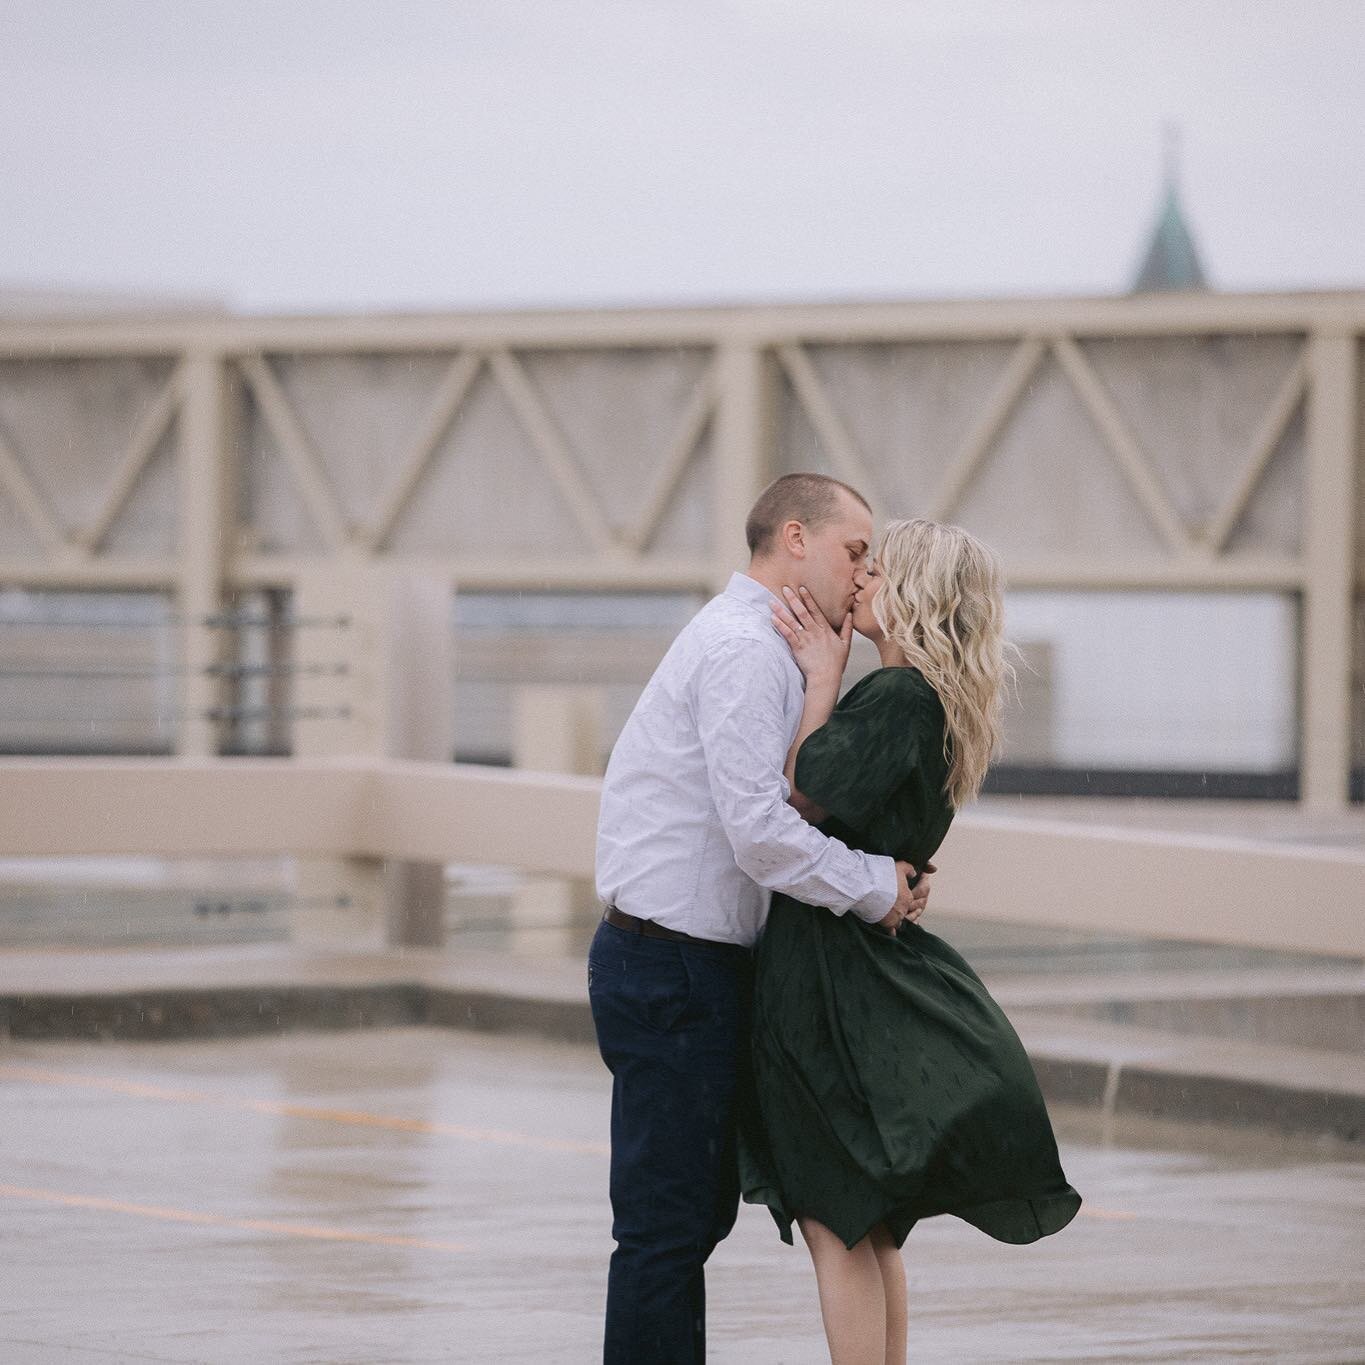 When it rains on your engagement session, you dance in it.
.
.
.
.
.
.
.
.
#desmoinesweddingphotographer #dancingintherain #desmoines #iowaweddingphotographer #catchdesmoines #canon #theknot #lookslikefilm #flashesofdelight #shesaidyes #desmoines #en